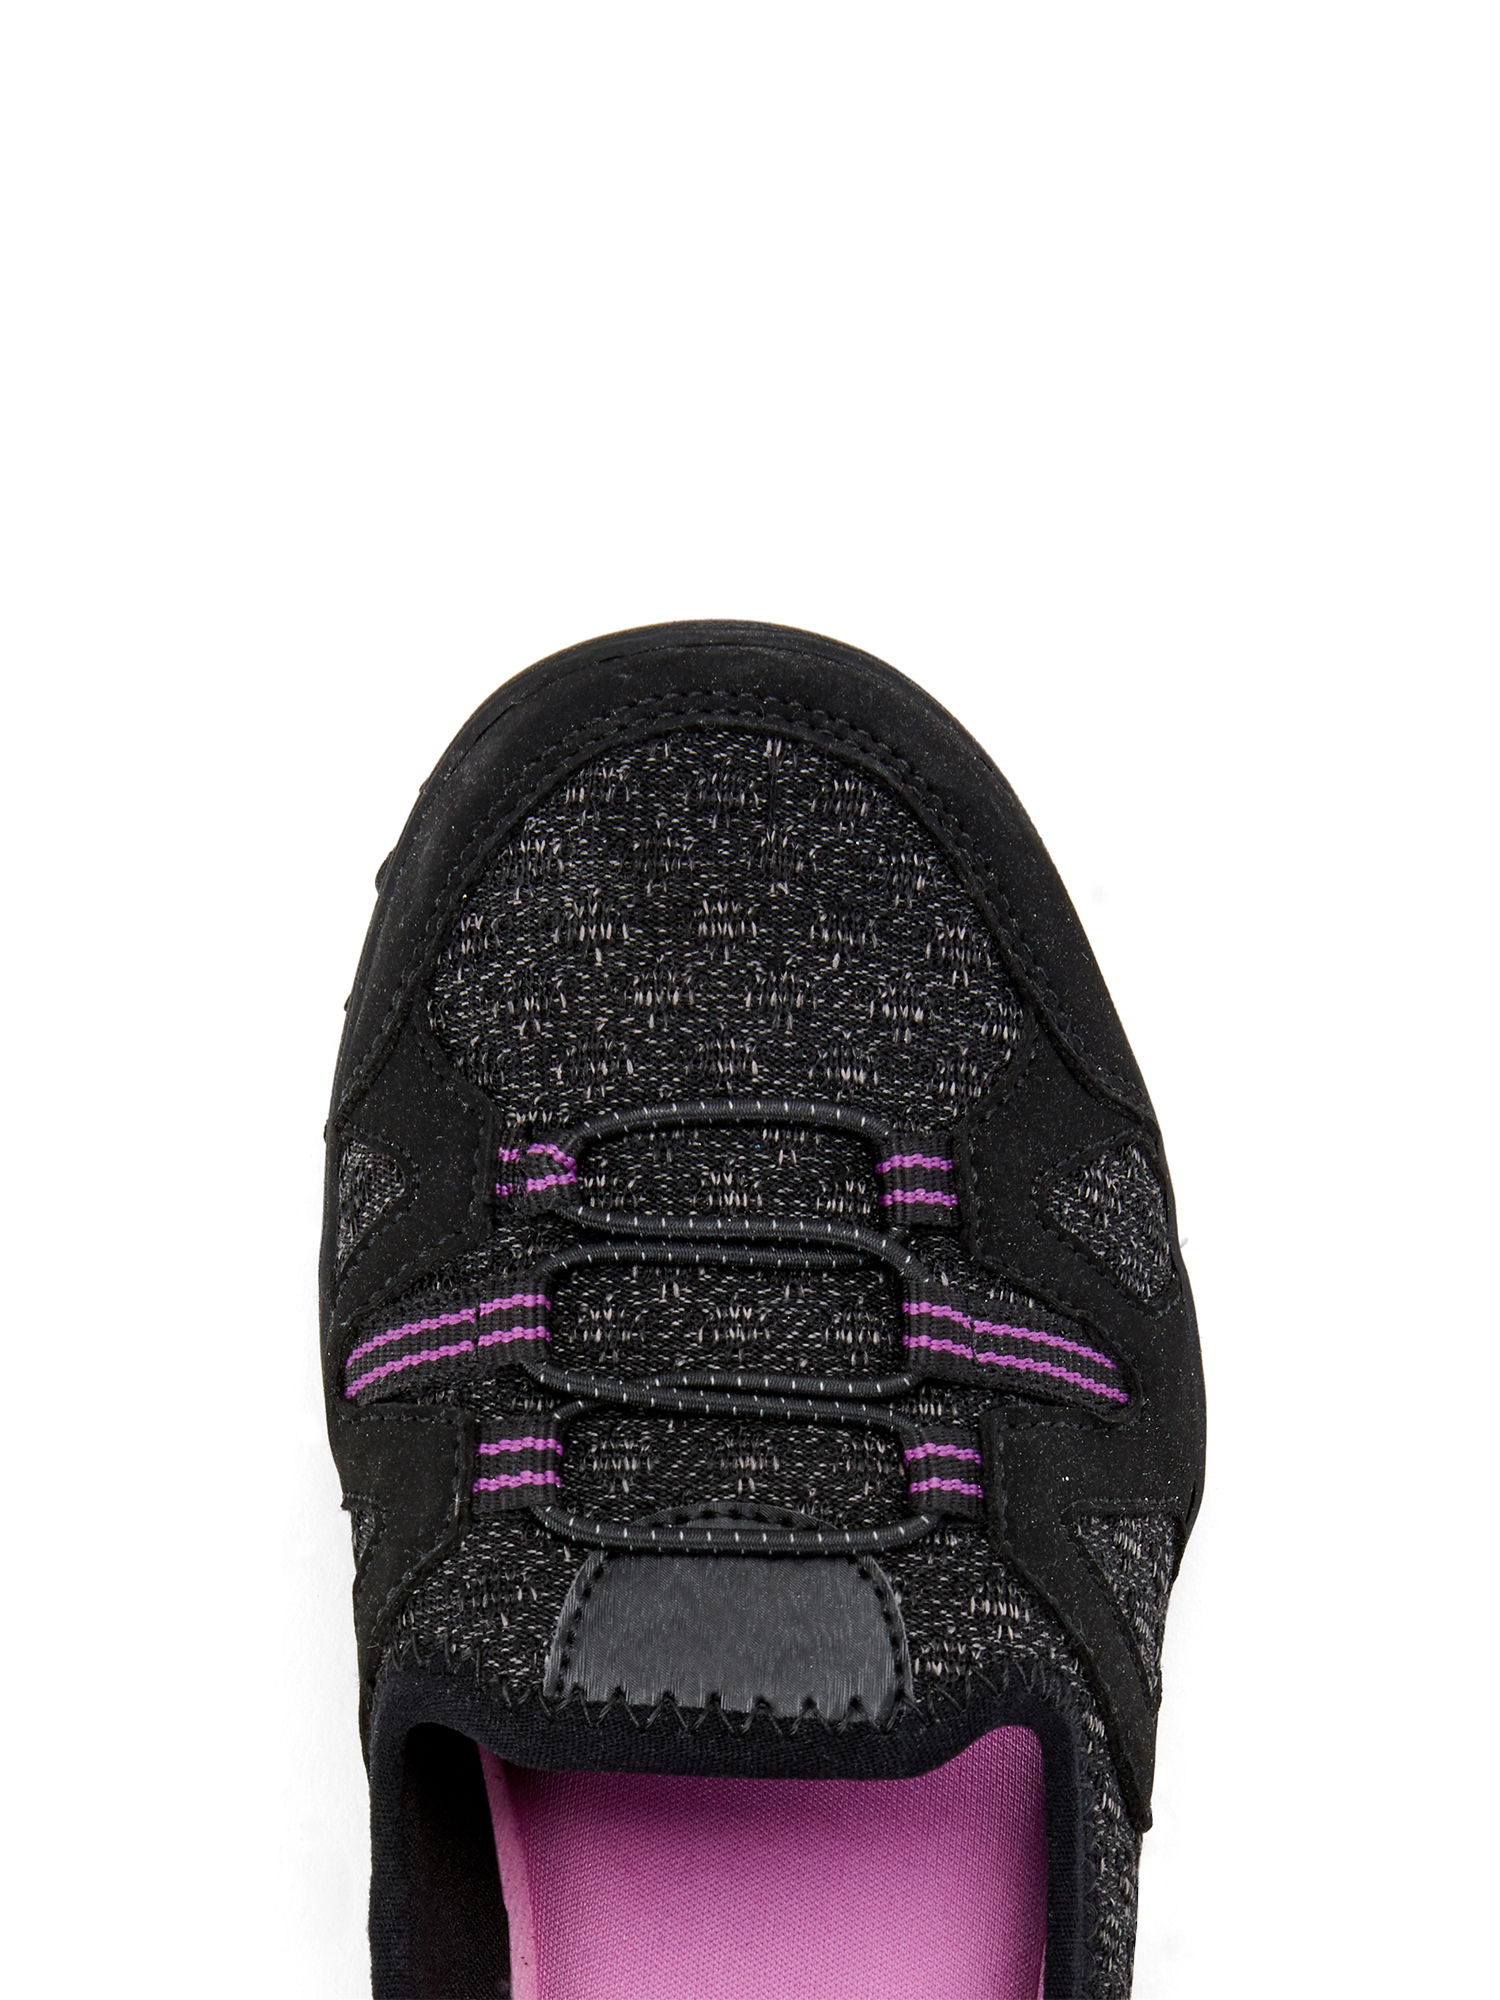 Athletic Works Women's Low Bungee Sneaker (Wide Width Available) - image 2 of 6